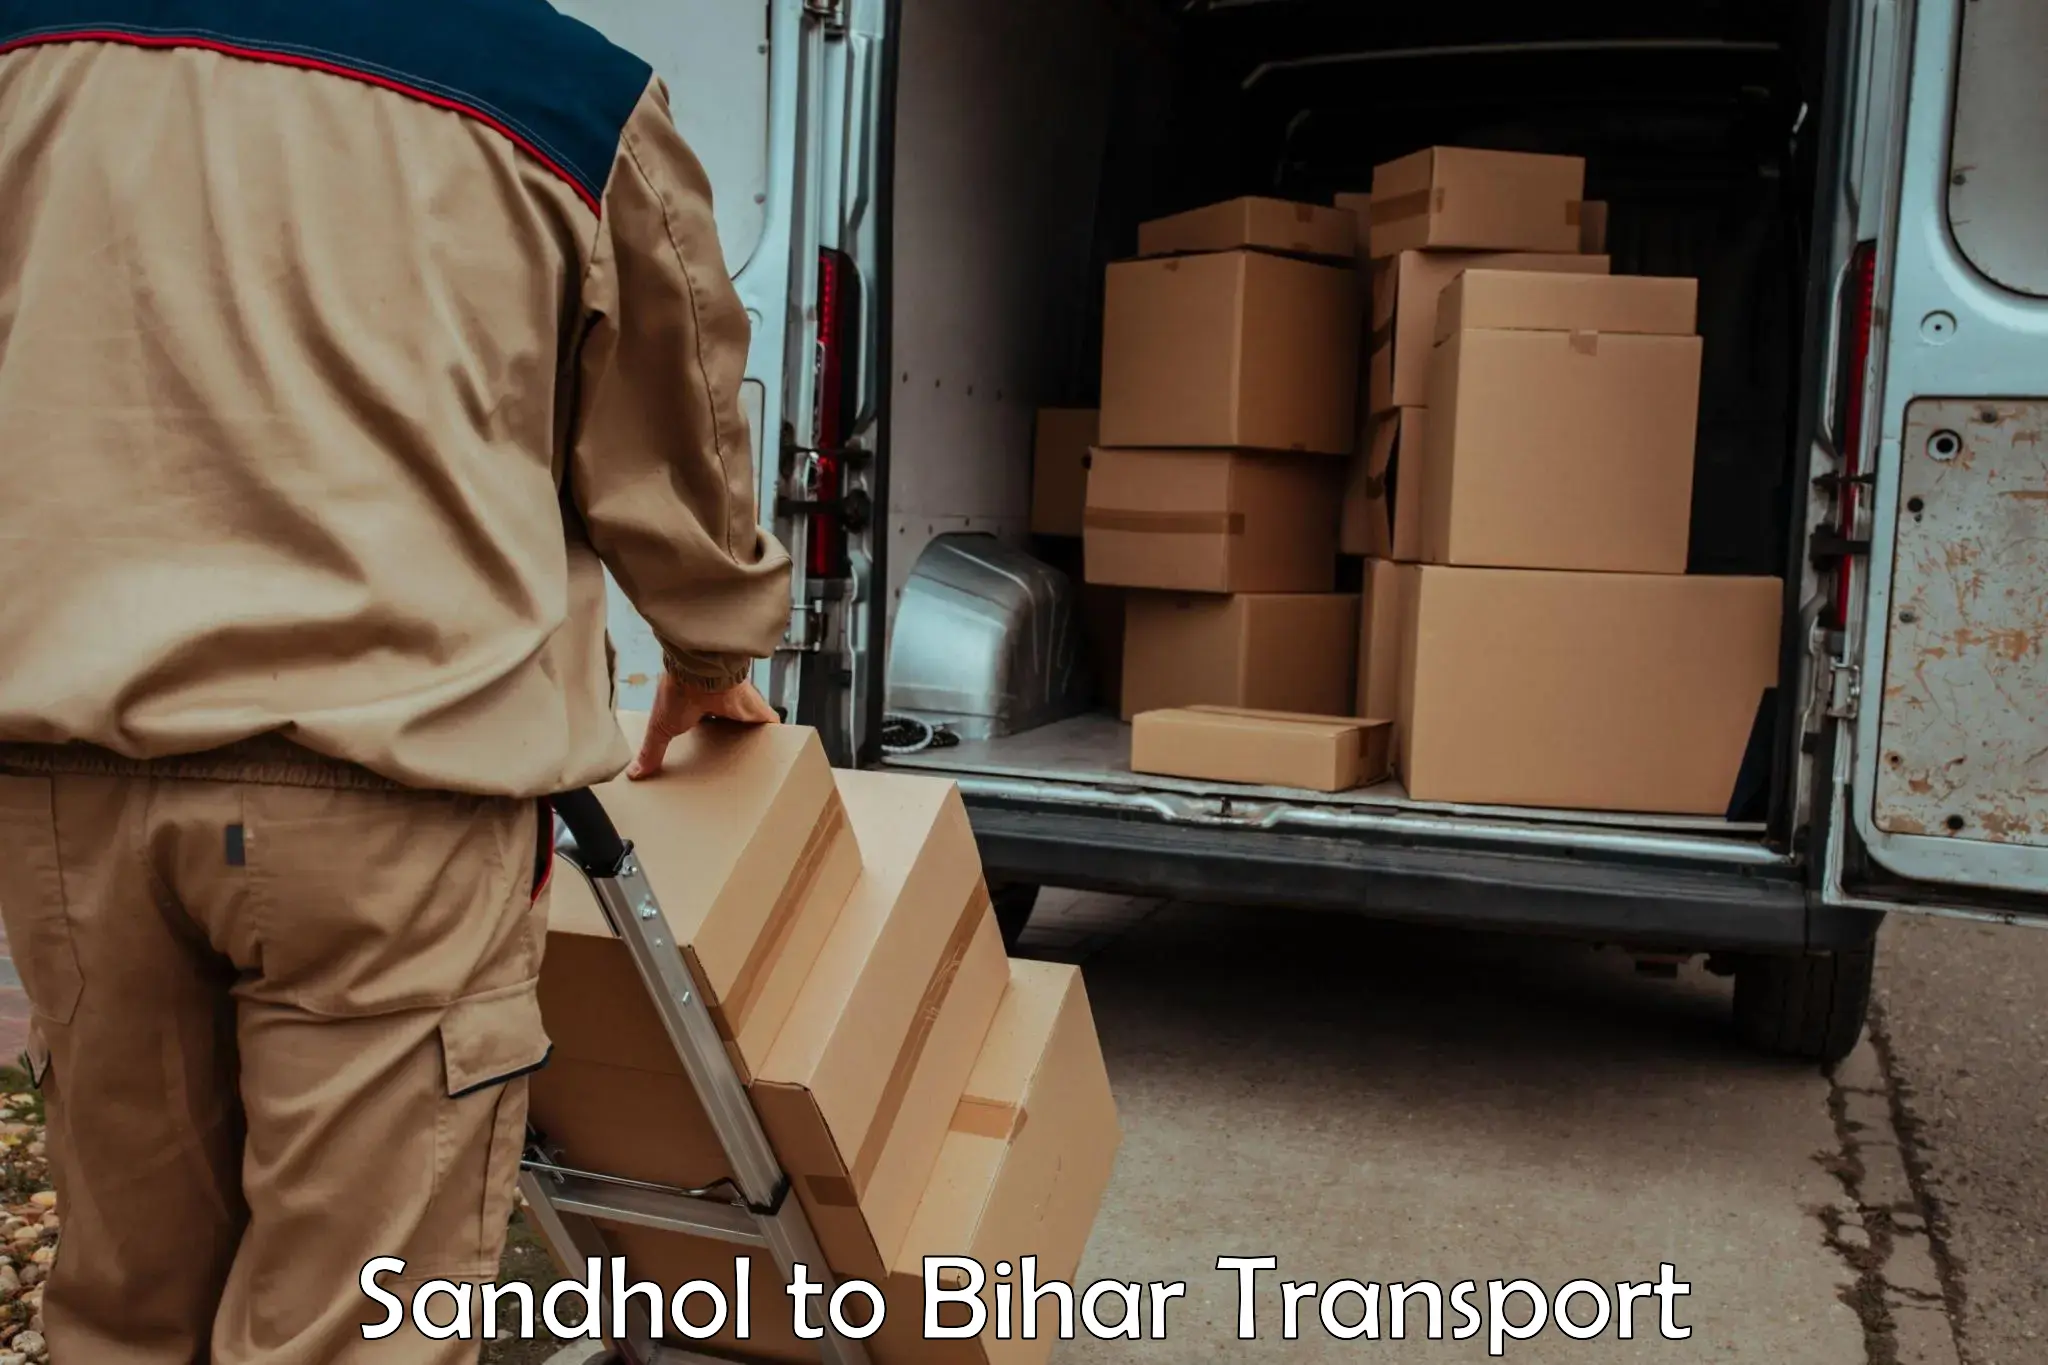 Truck transport companies in India in Sandhol to Chainpur